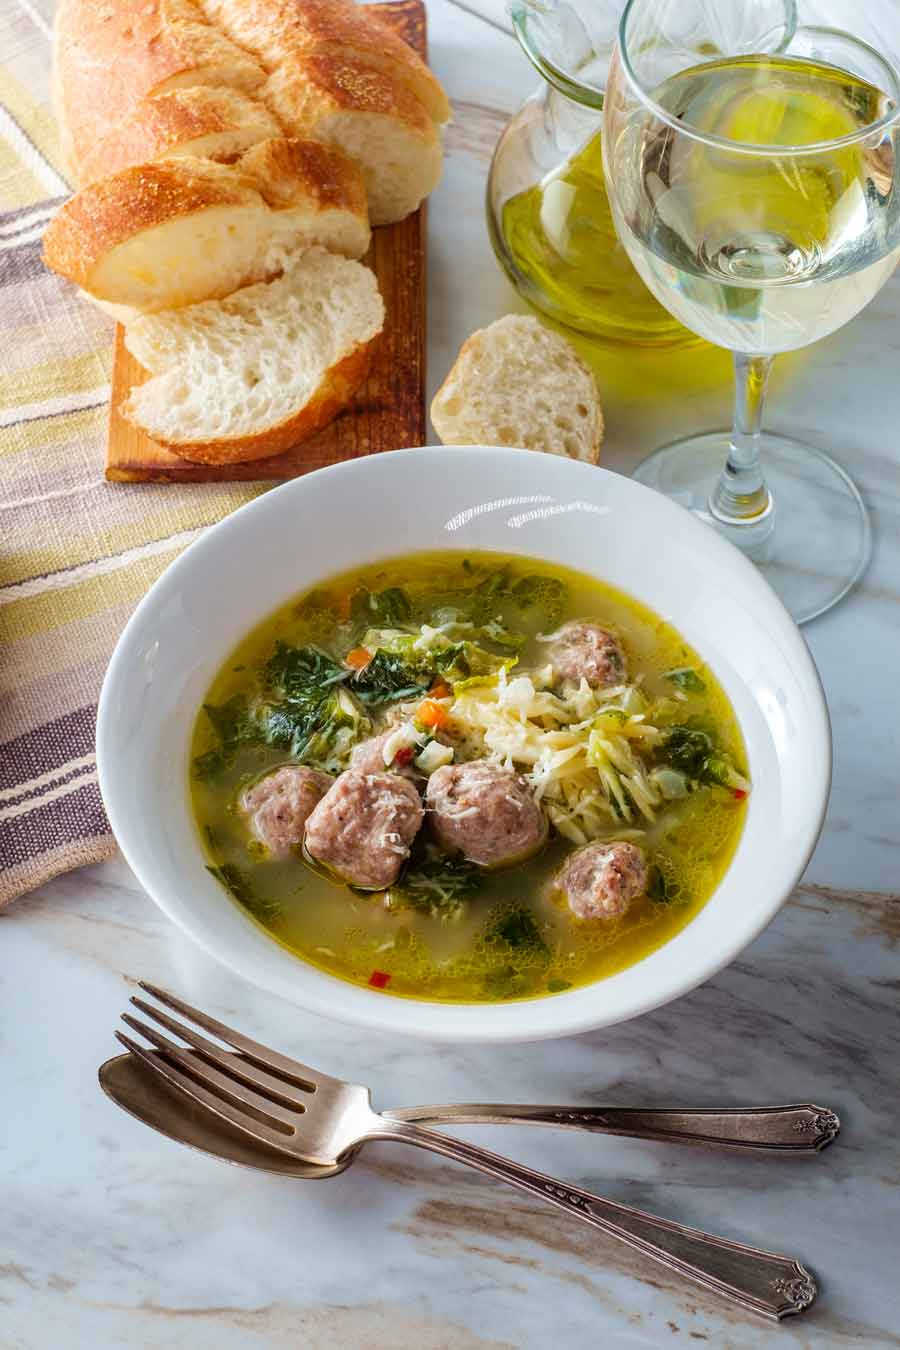 Italian wedding soup with meatballs in a white bowl.